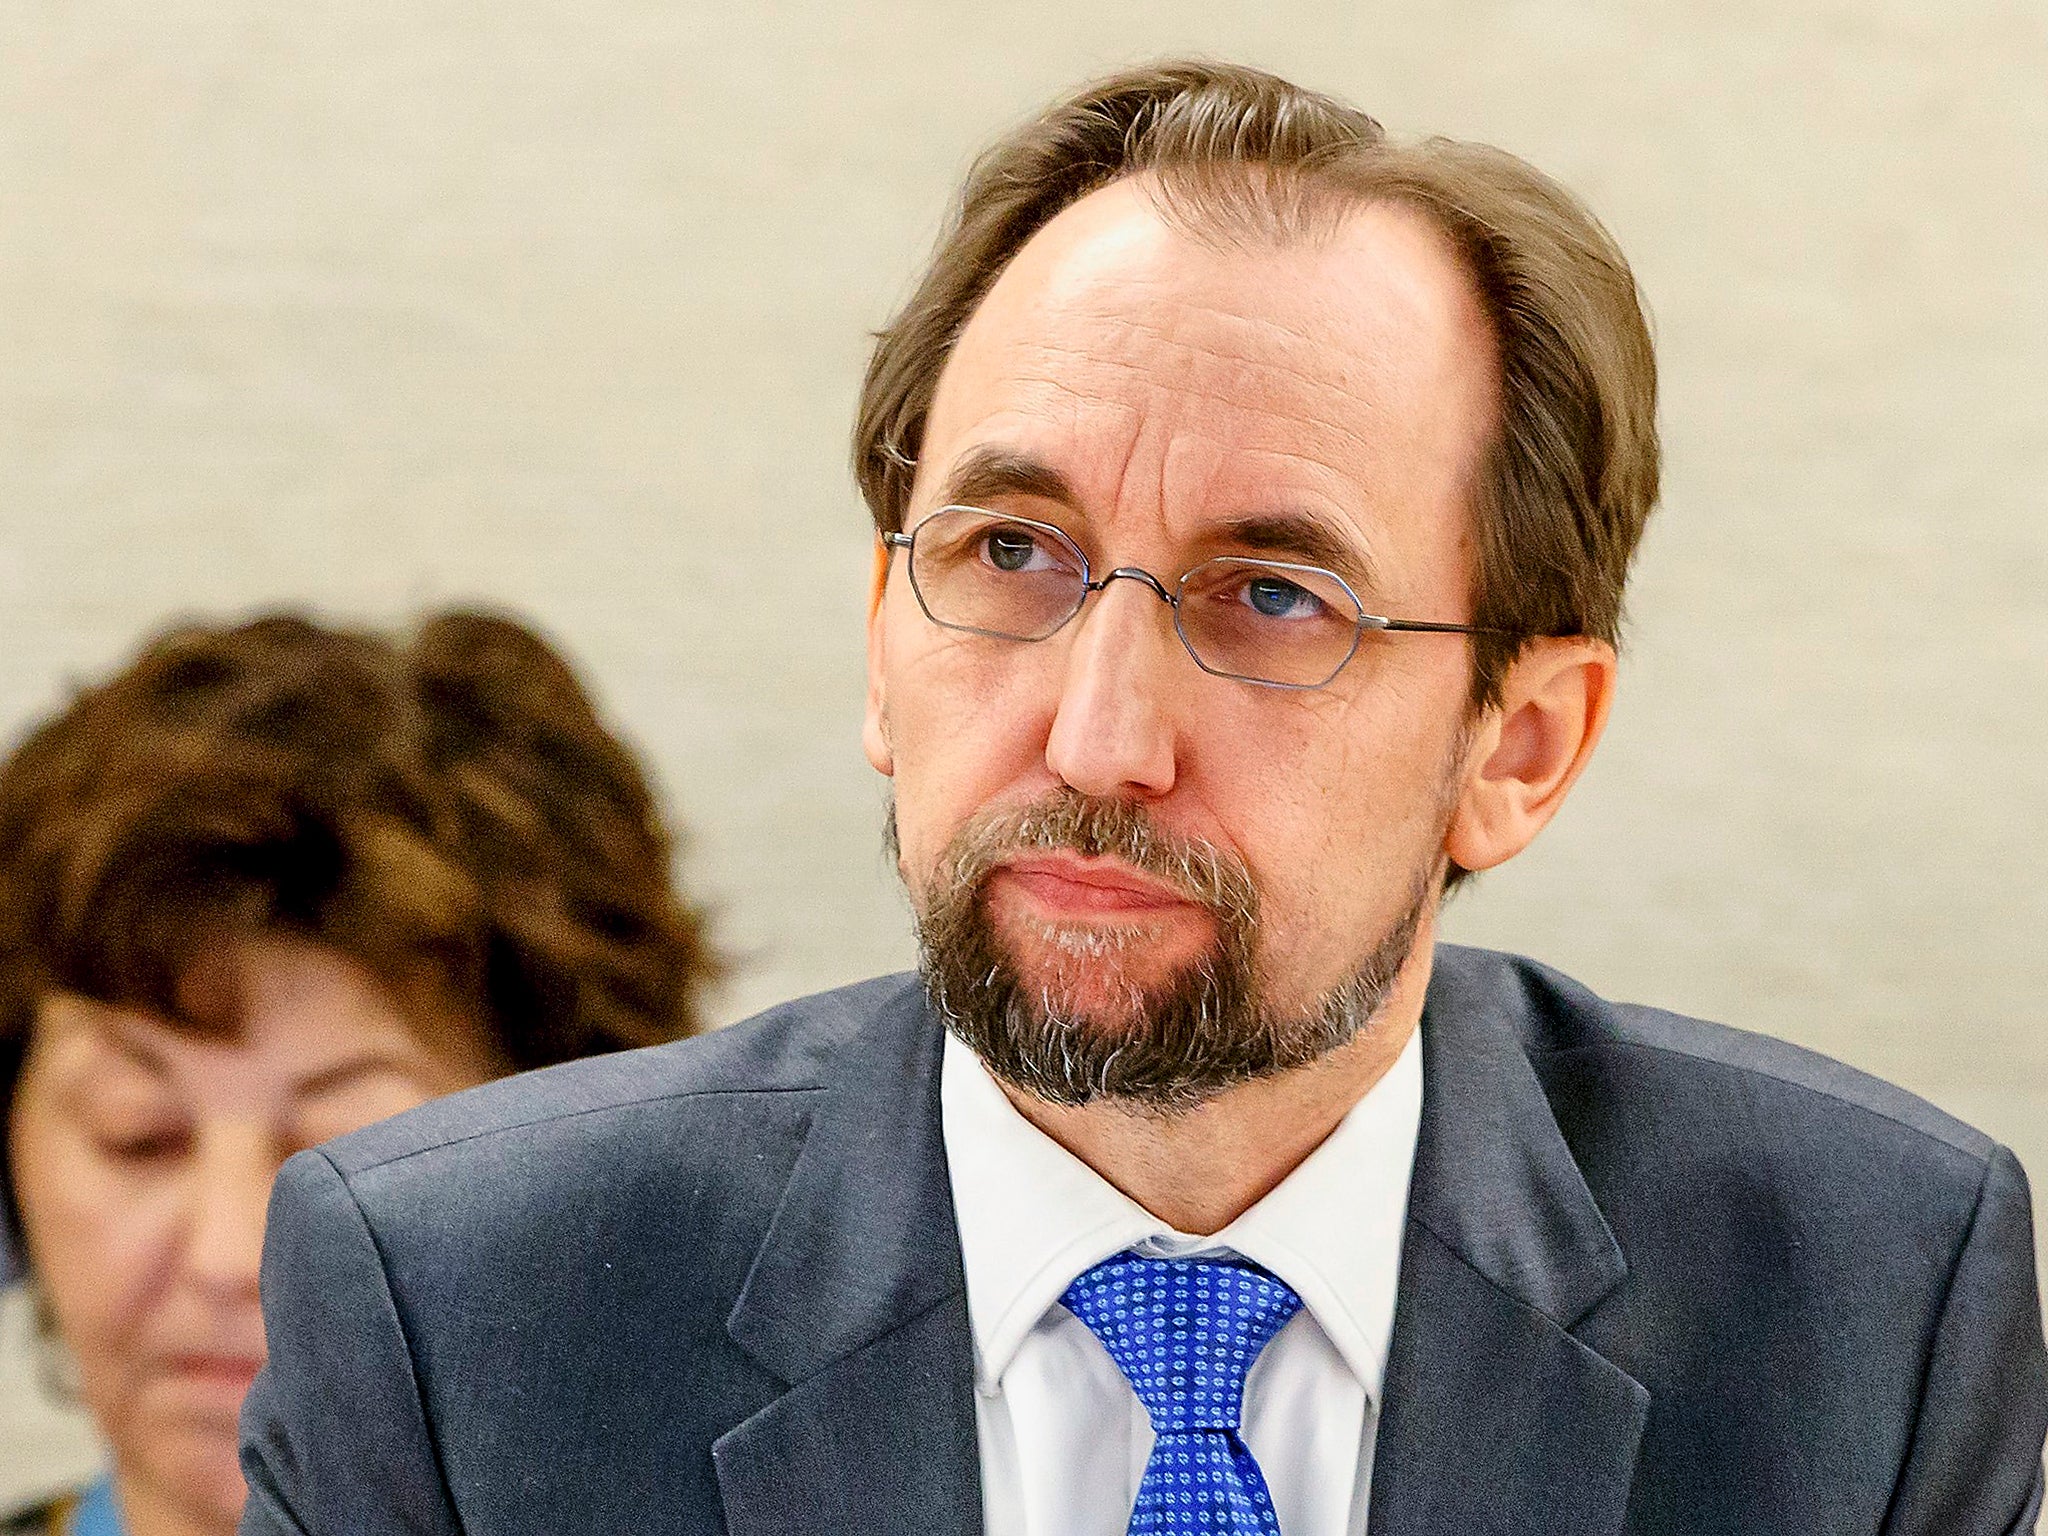 Zeid Ra’ad al-Hussein accused the Government of using terrorism as a 'pretext' to violate human rights laws